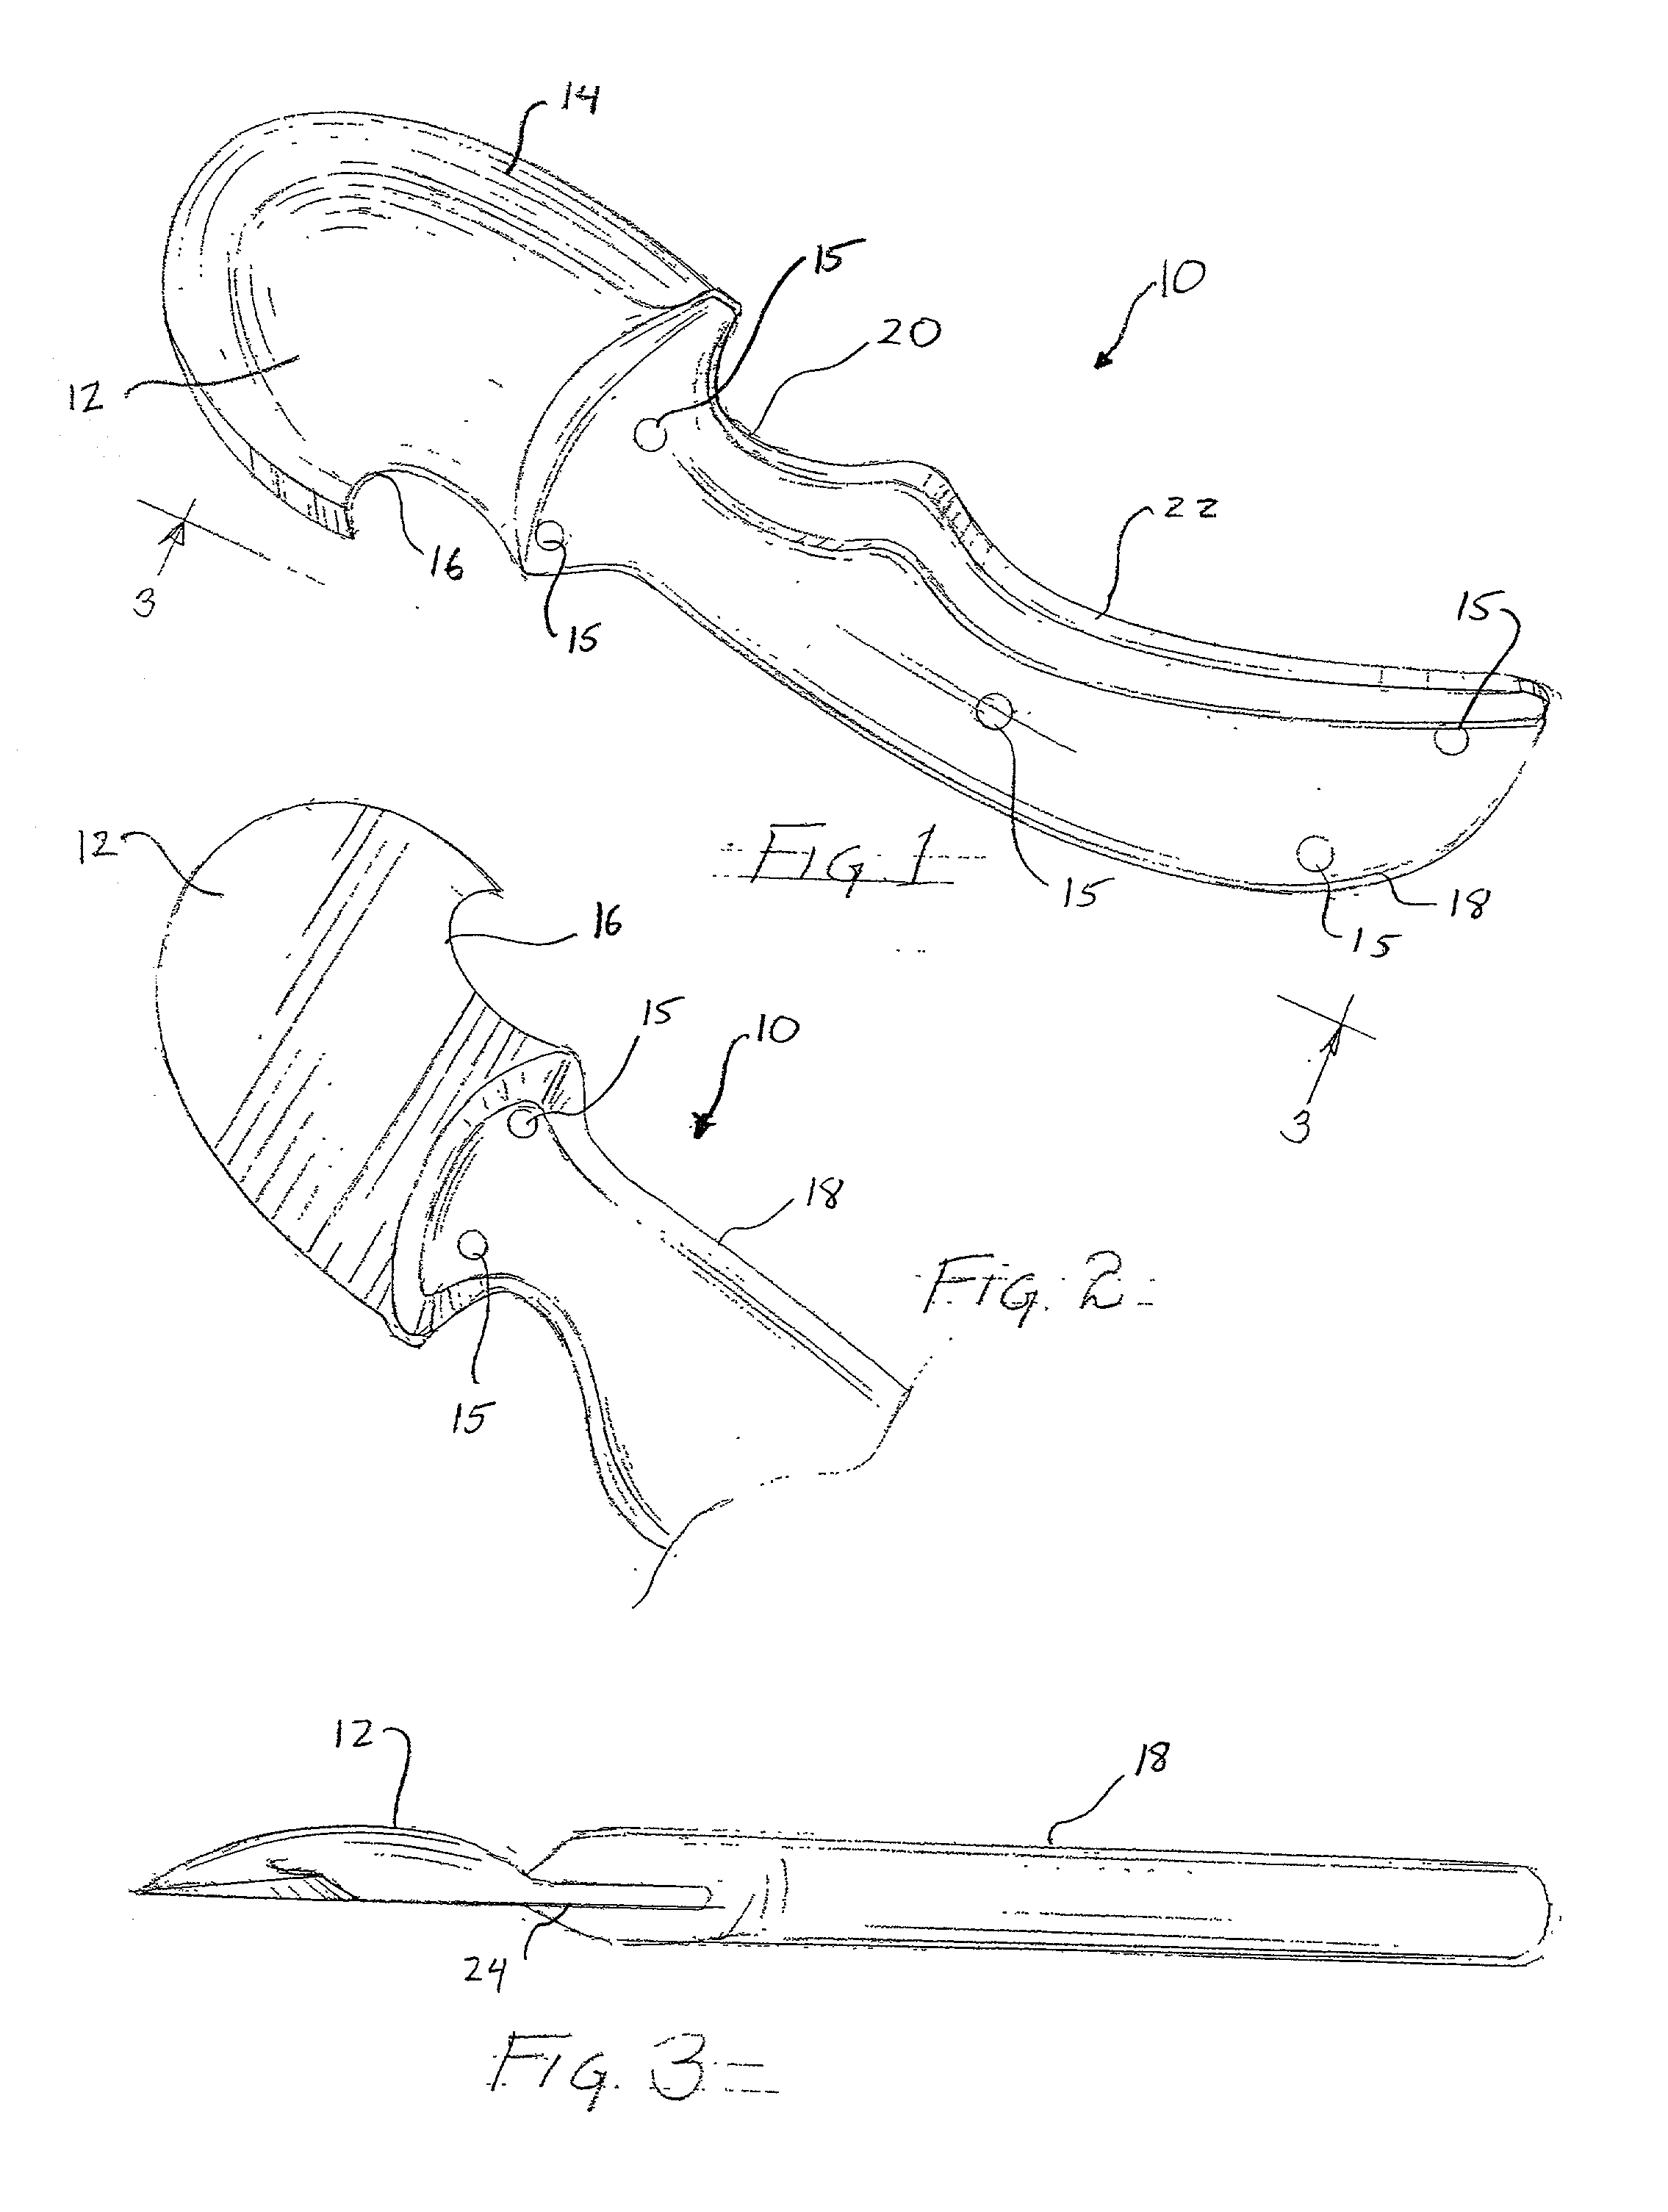 Knife for removing the hide of an animal and method therefor